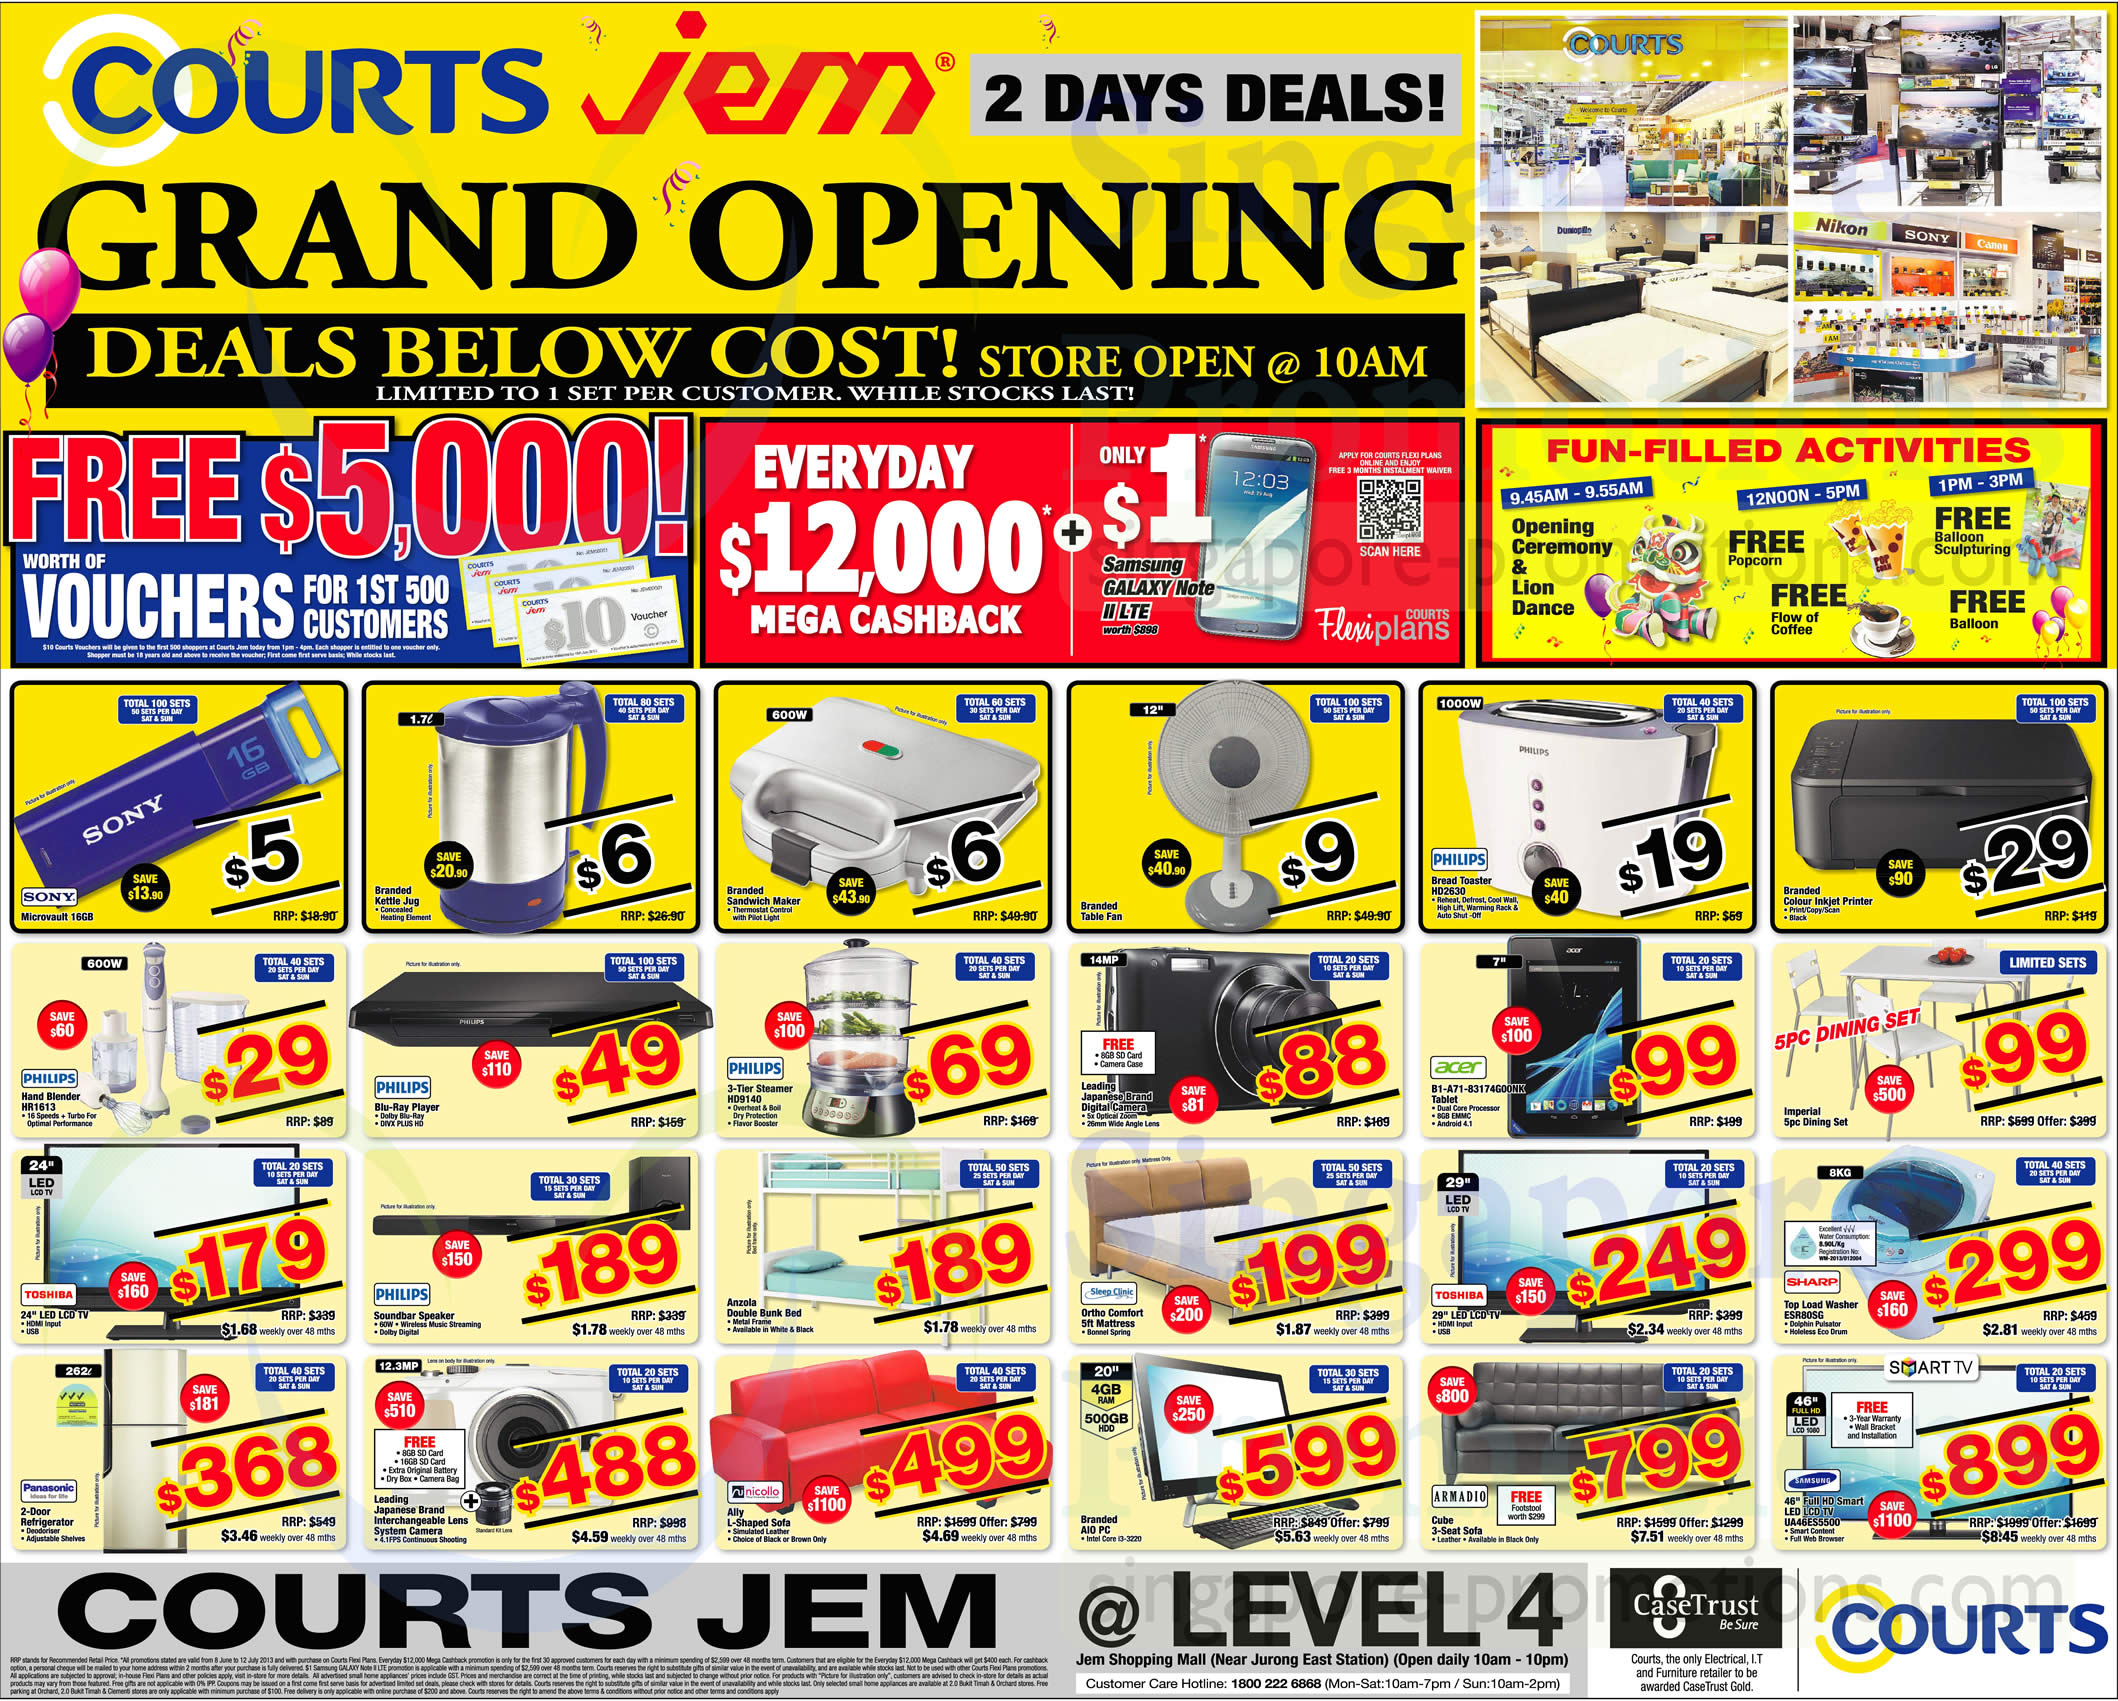 Featured image for Courts JEM Grand Opening 2 Days Celebration Deals Islandwide 22 - 23 Jun 2013